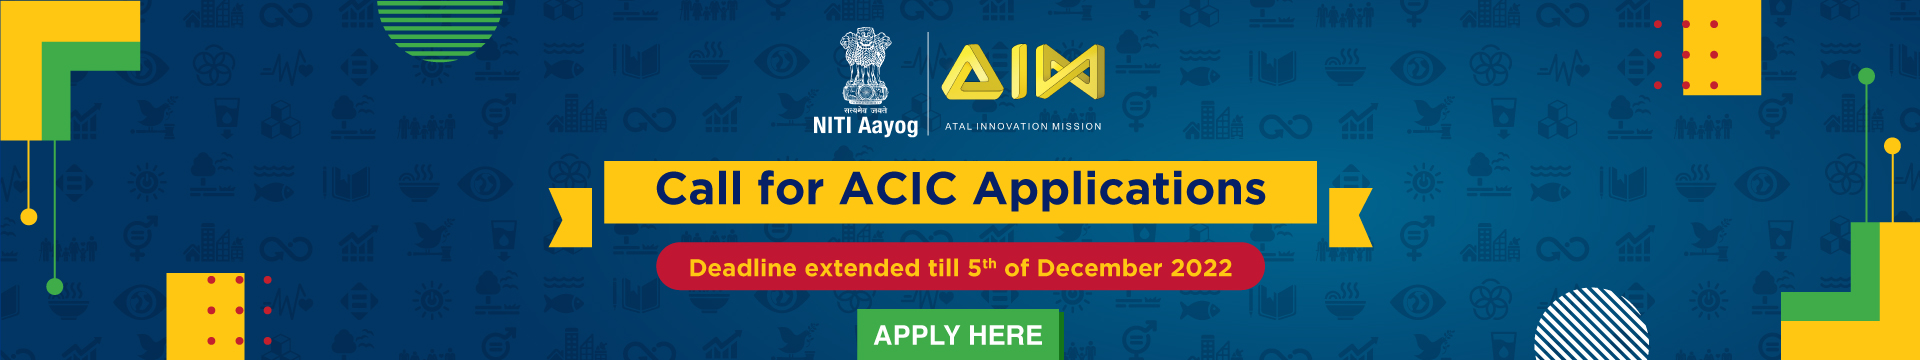 Call for ACIC Applications